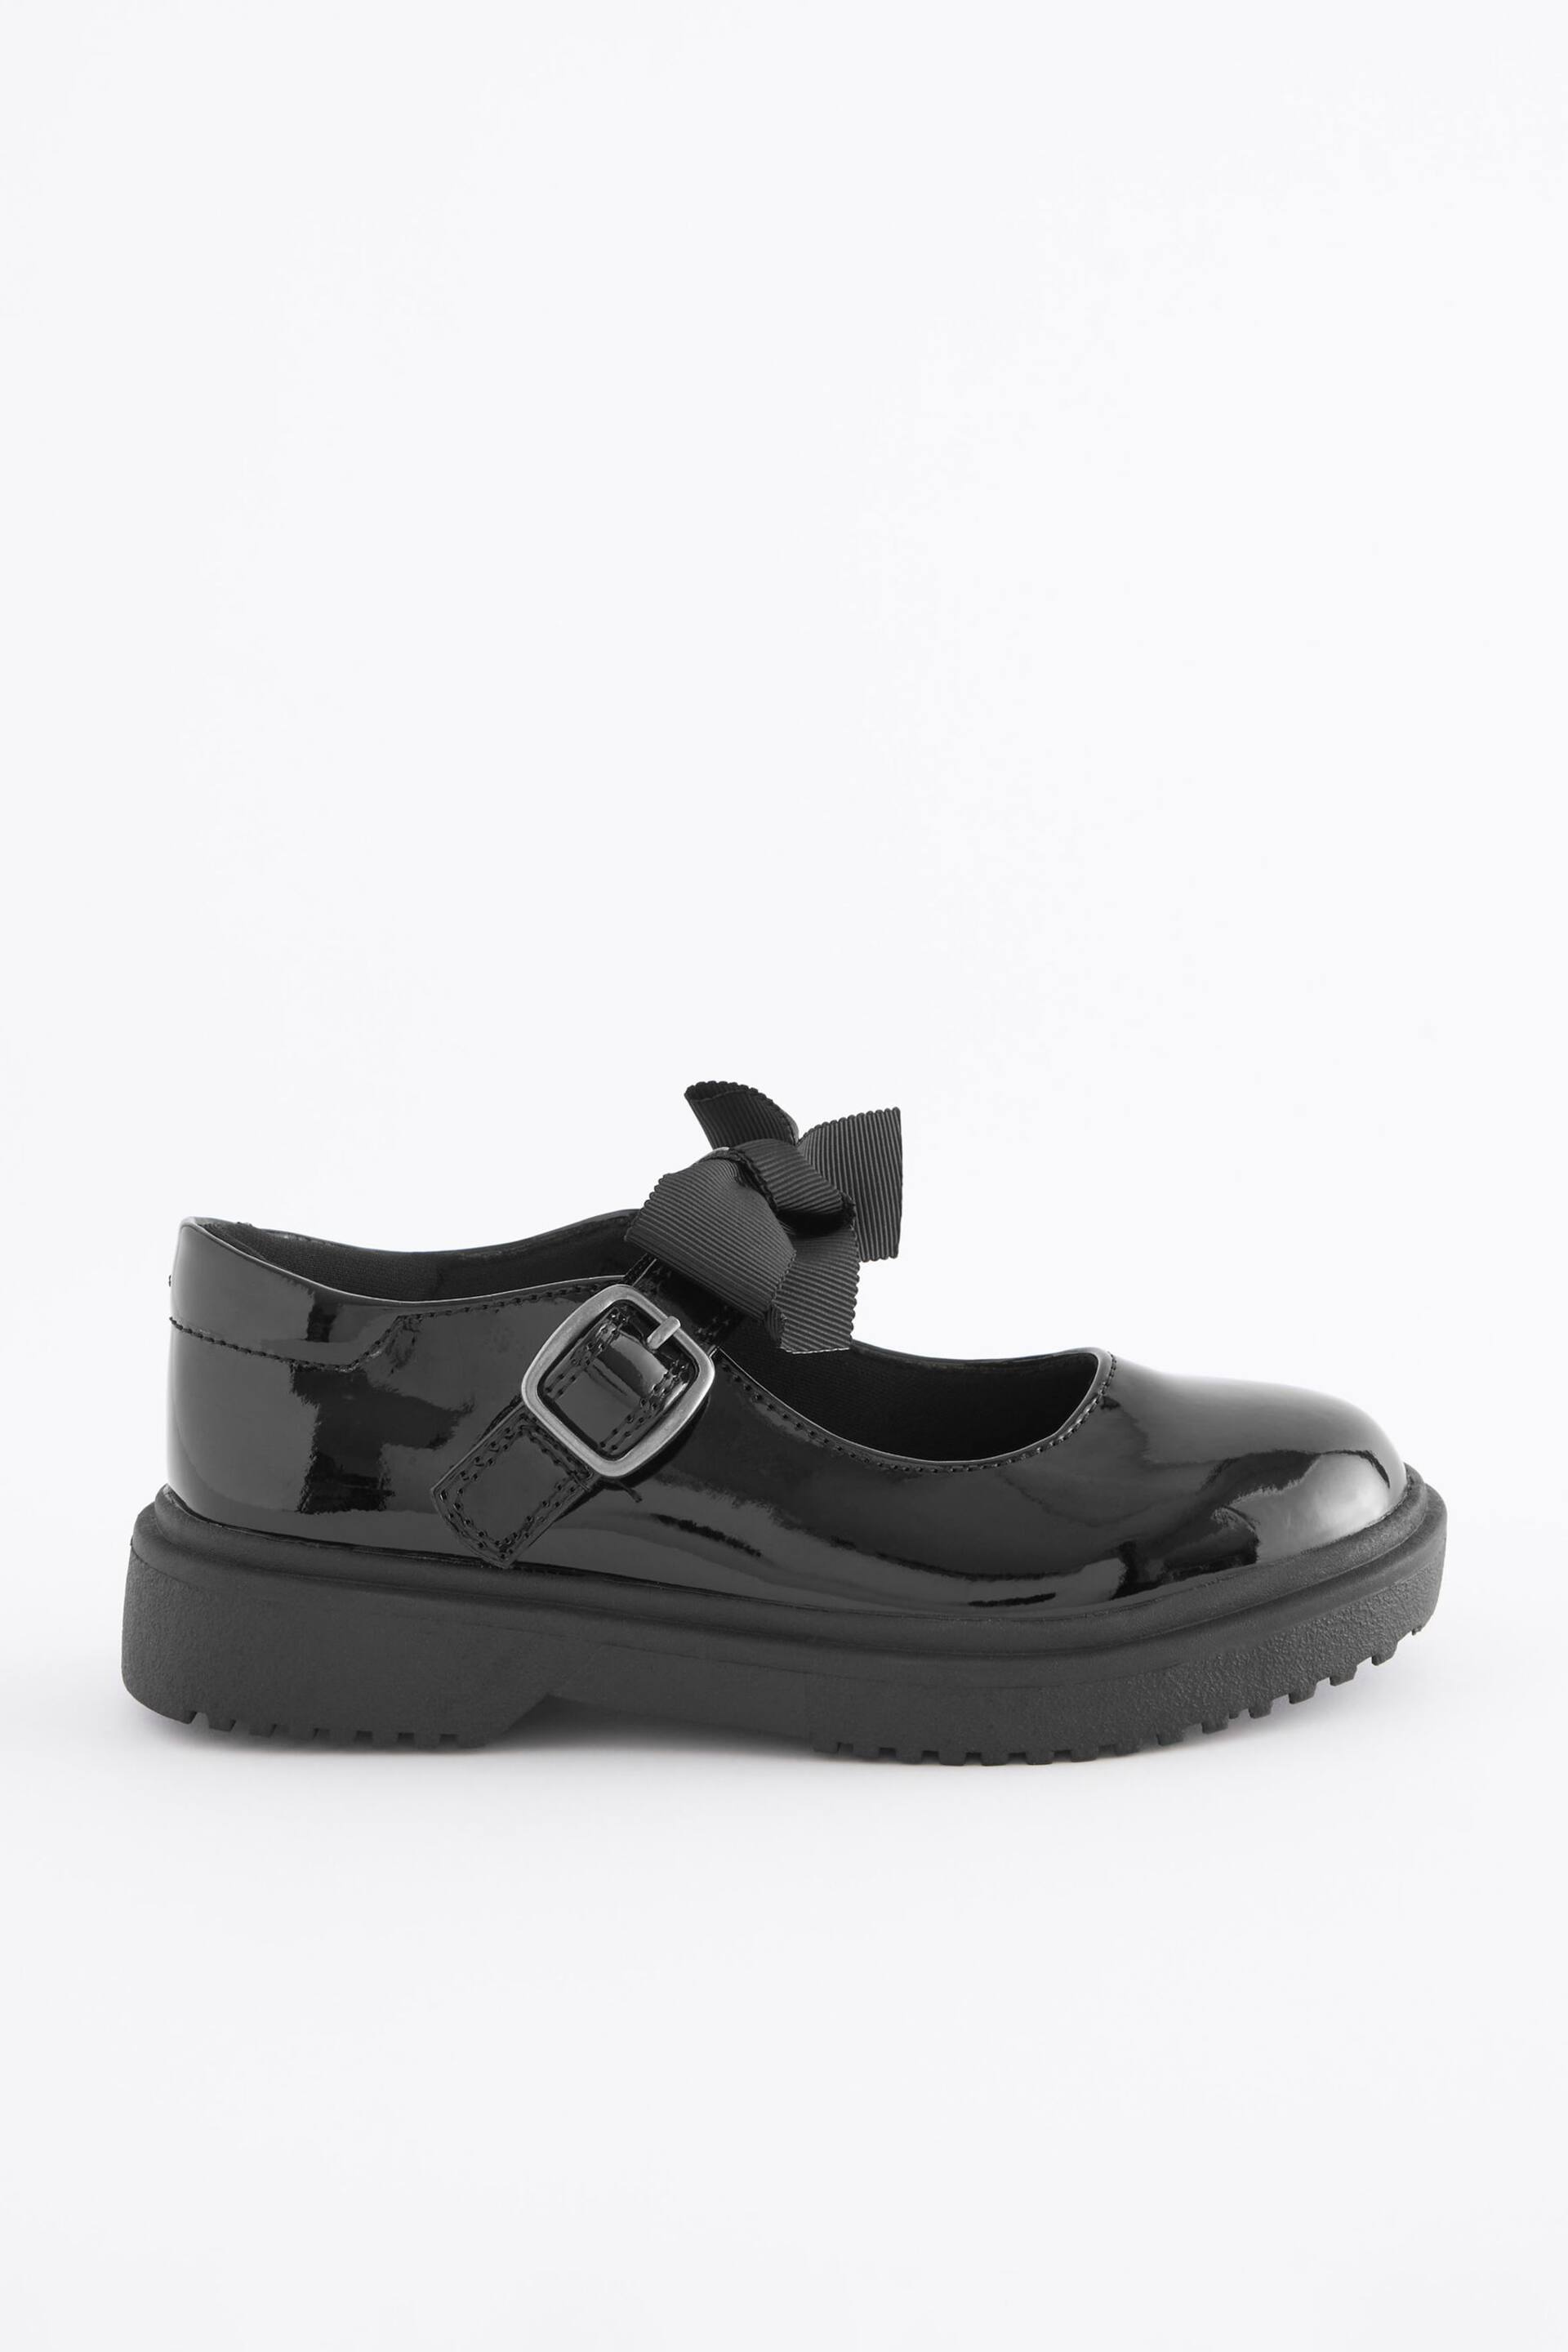 Black Patent Standard Fit (F) Bow Chunky Mary Jane School Shoes - Image 4 of 6